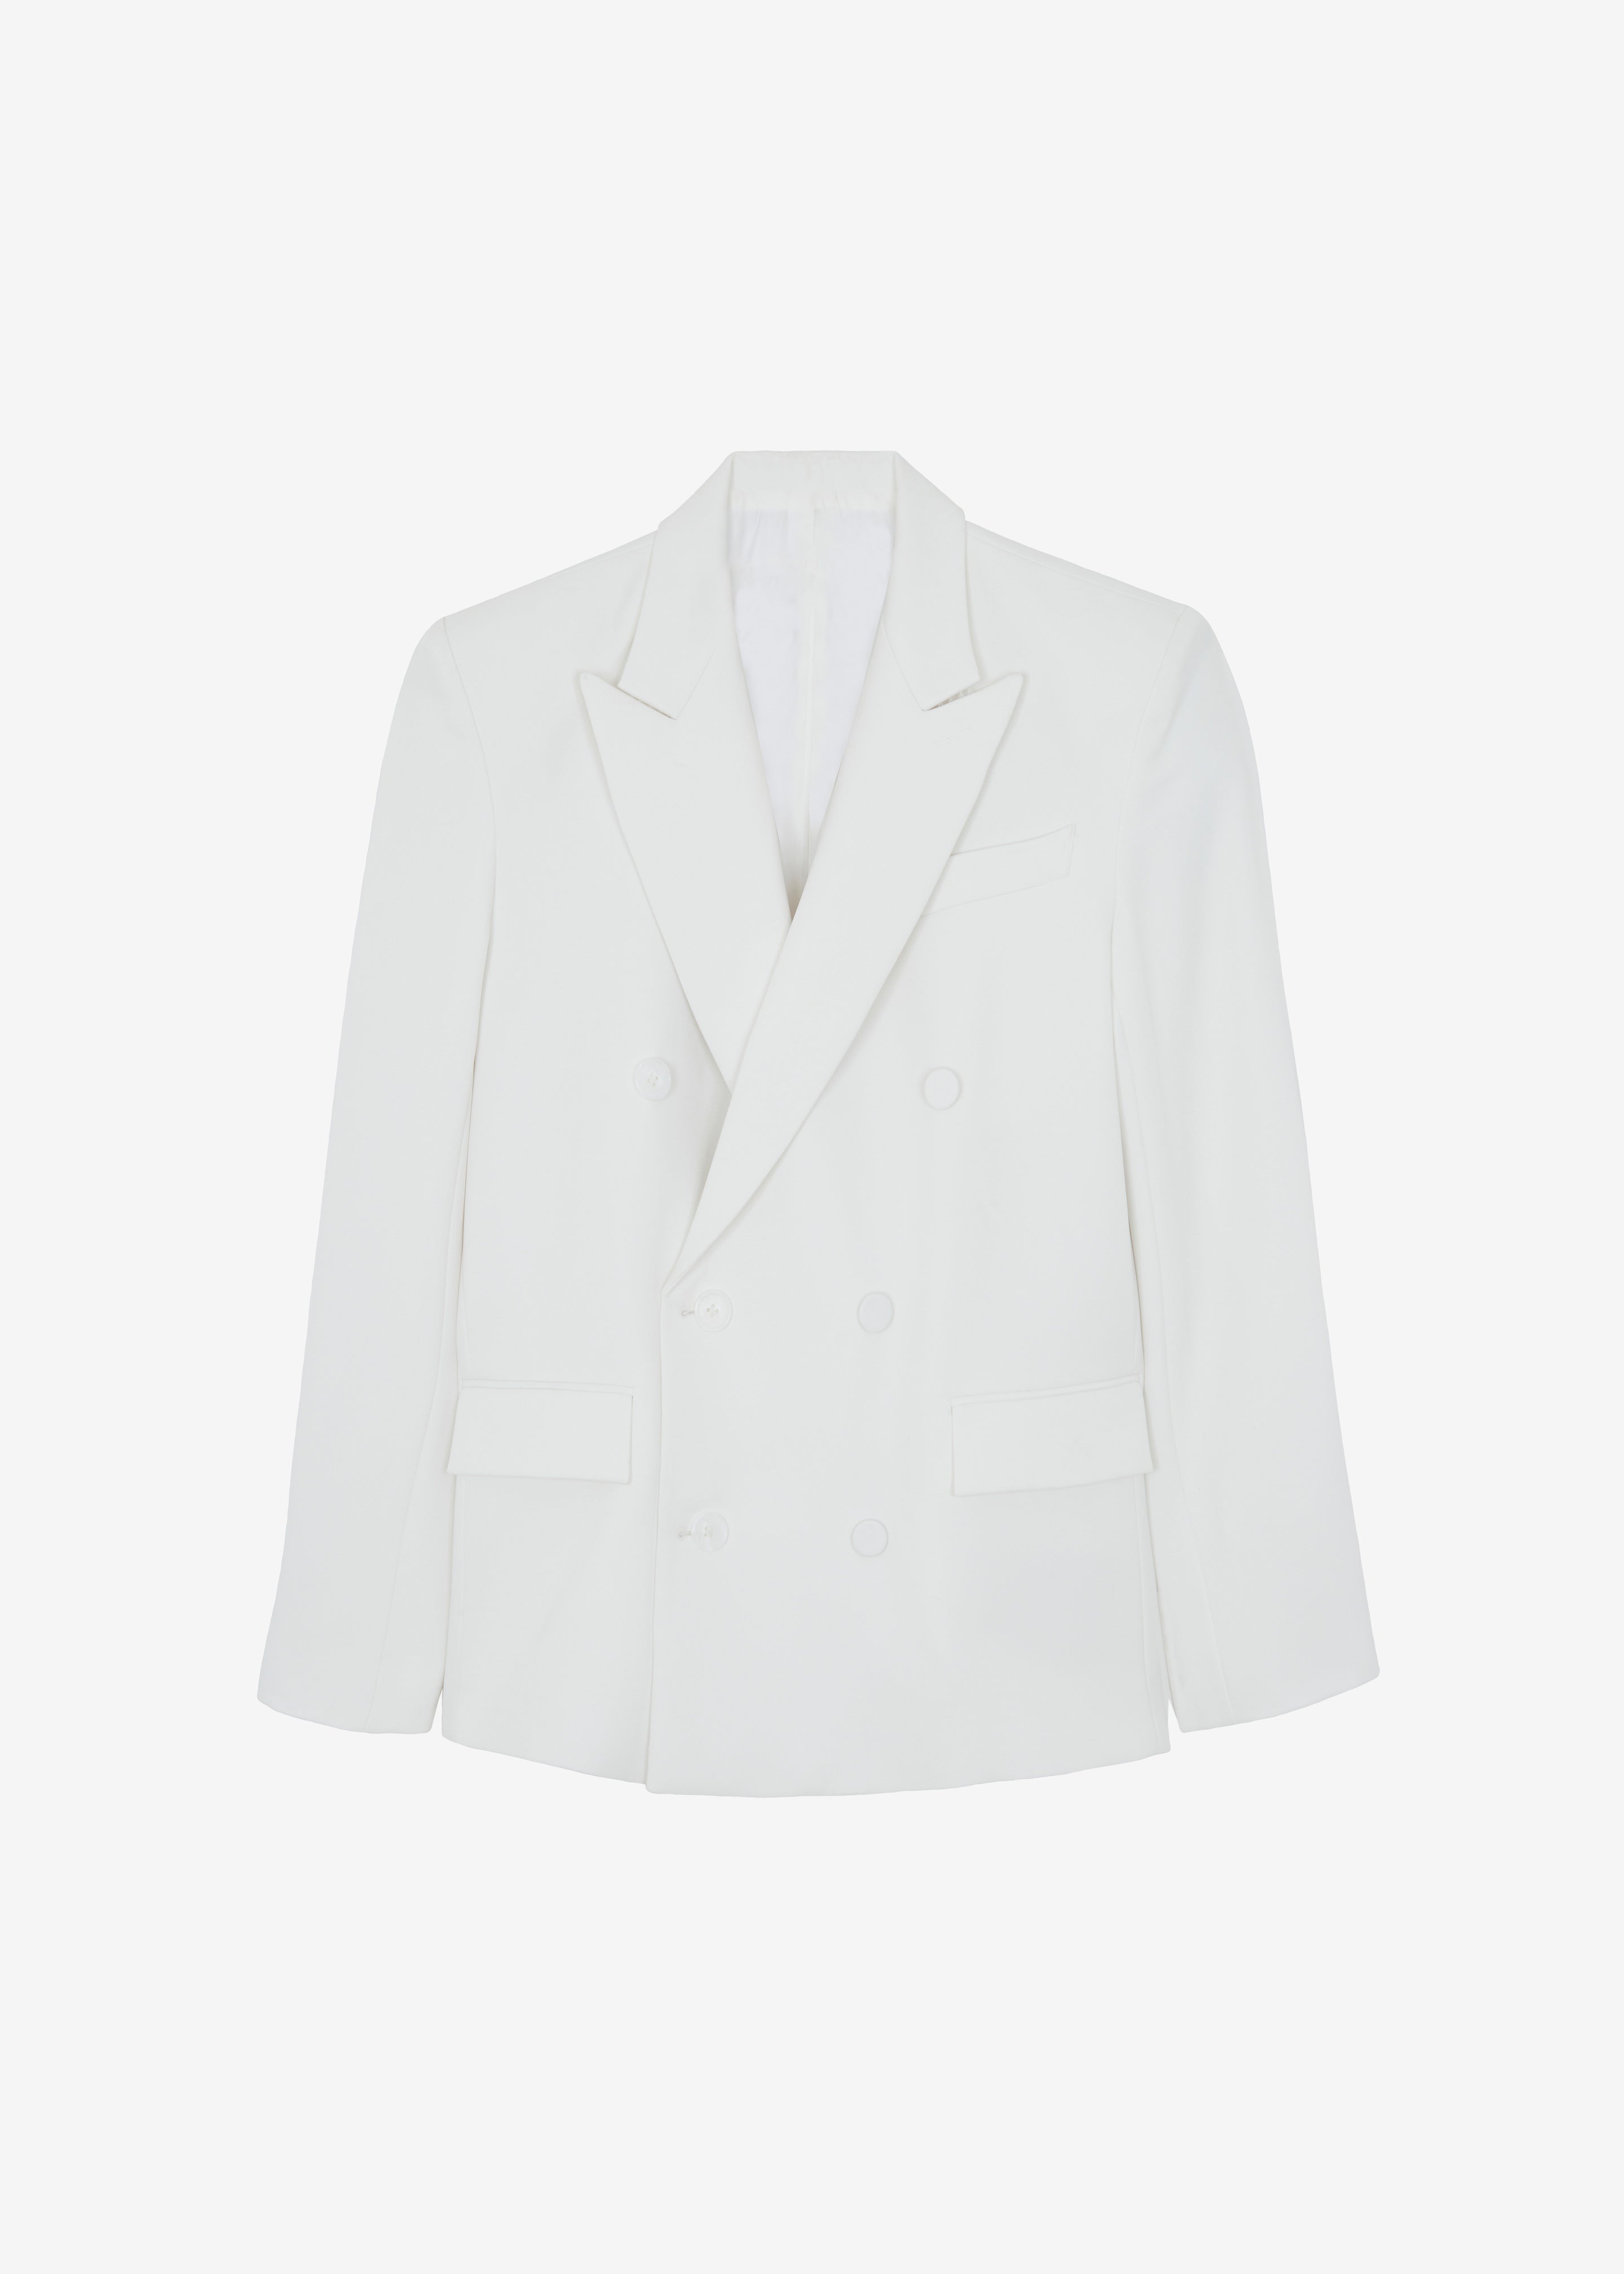 Zia Covered Buttons Blazer - White - 12